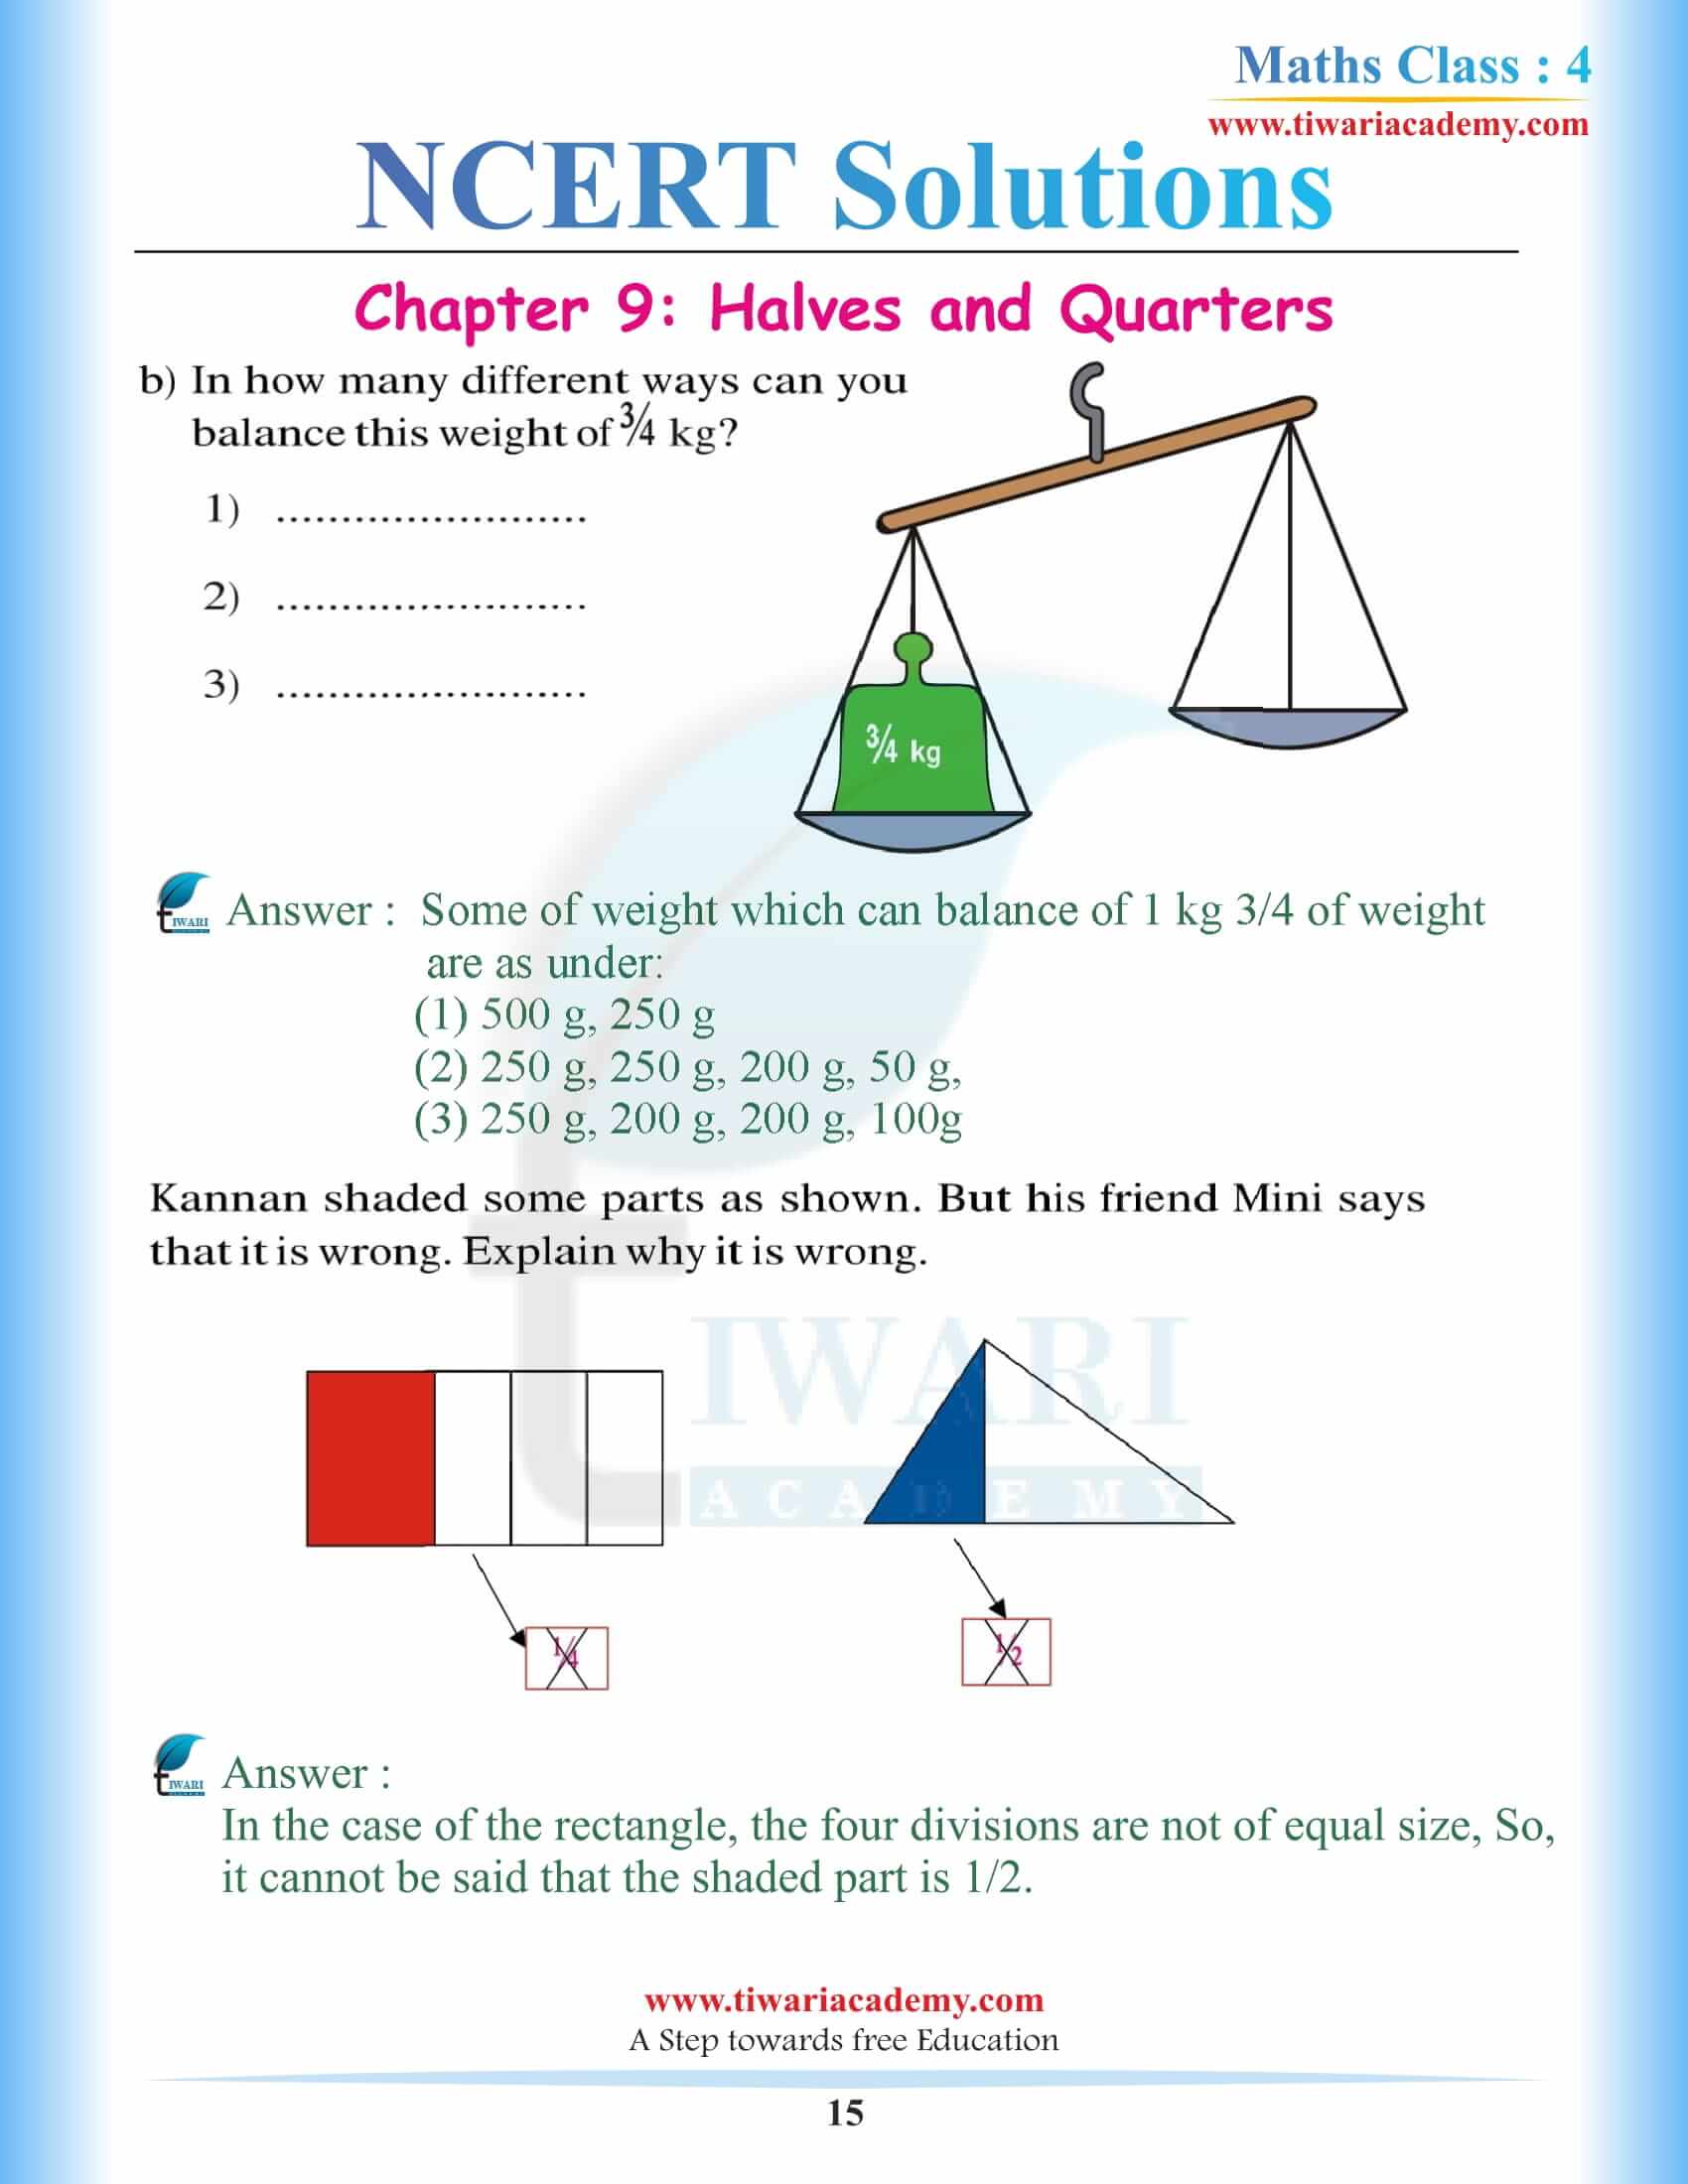 Standard 4th Maths NCERT Chapter 9 Solutions free download